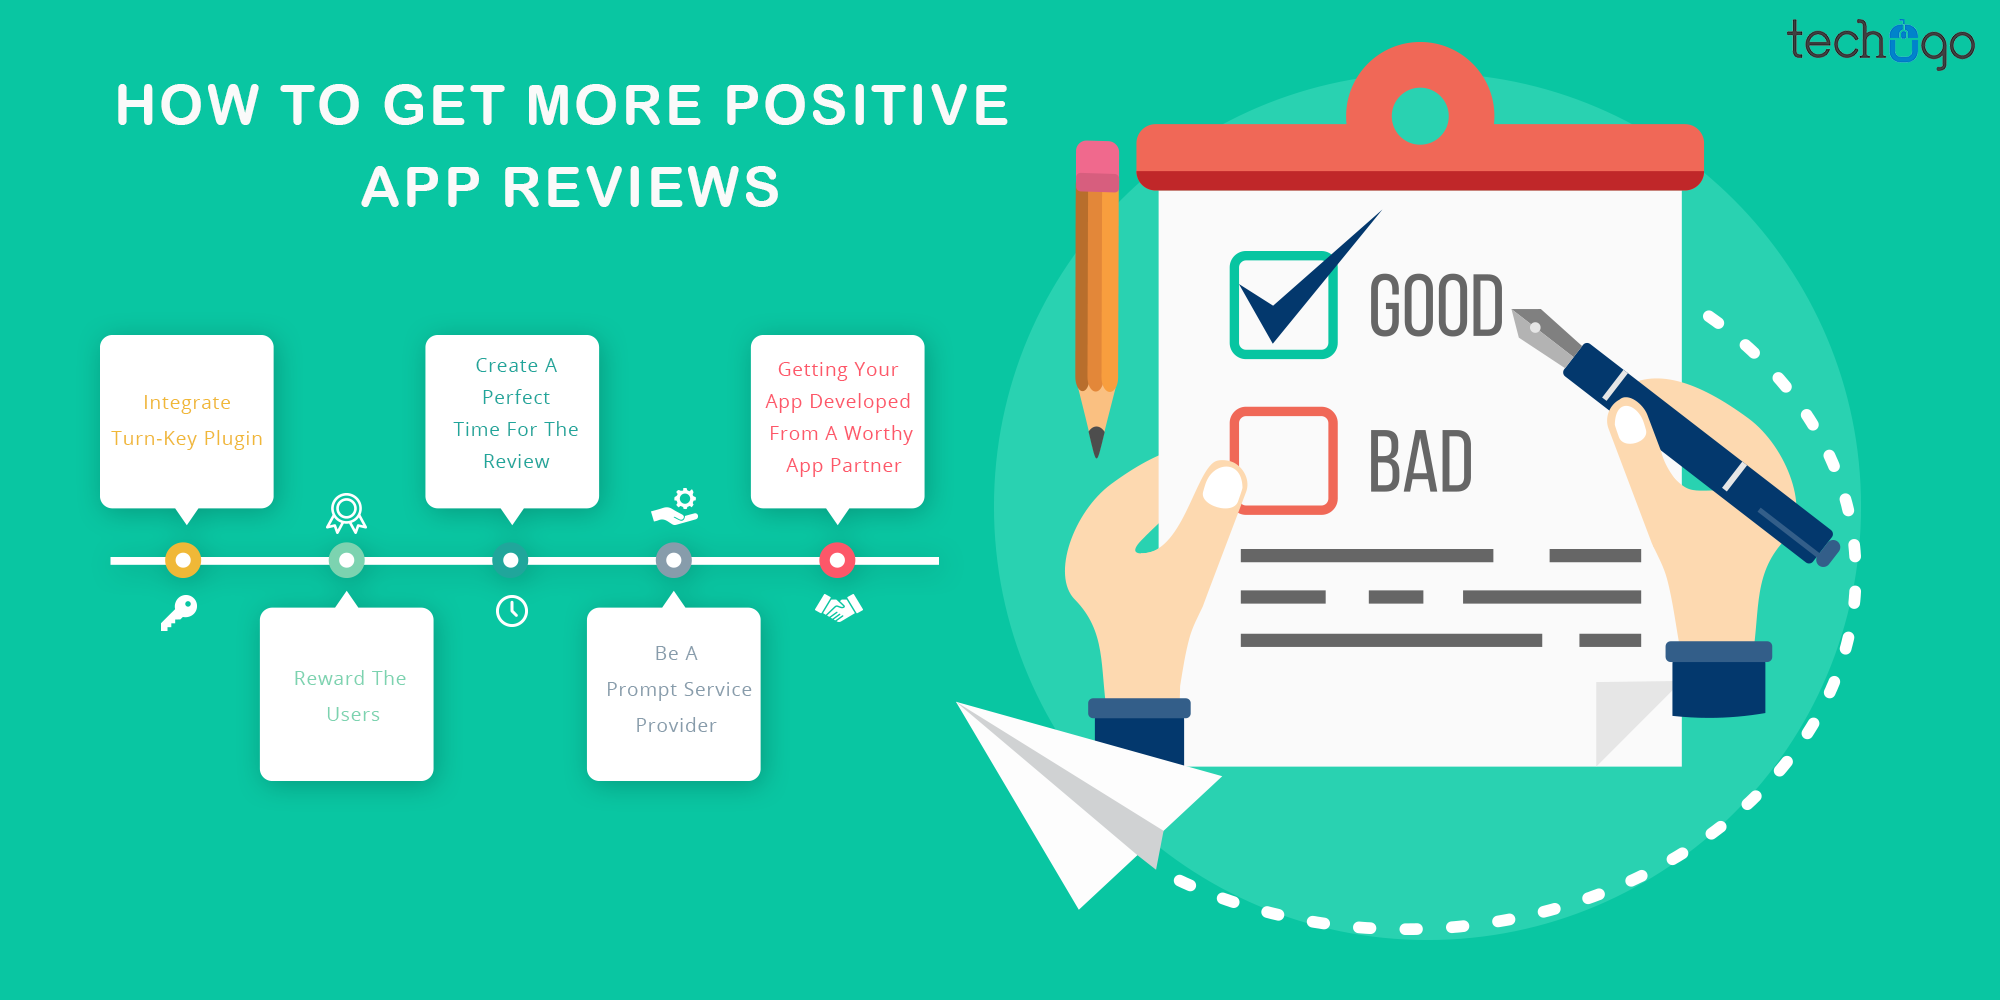 How To Get More Positive App Reviews